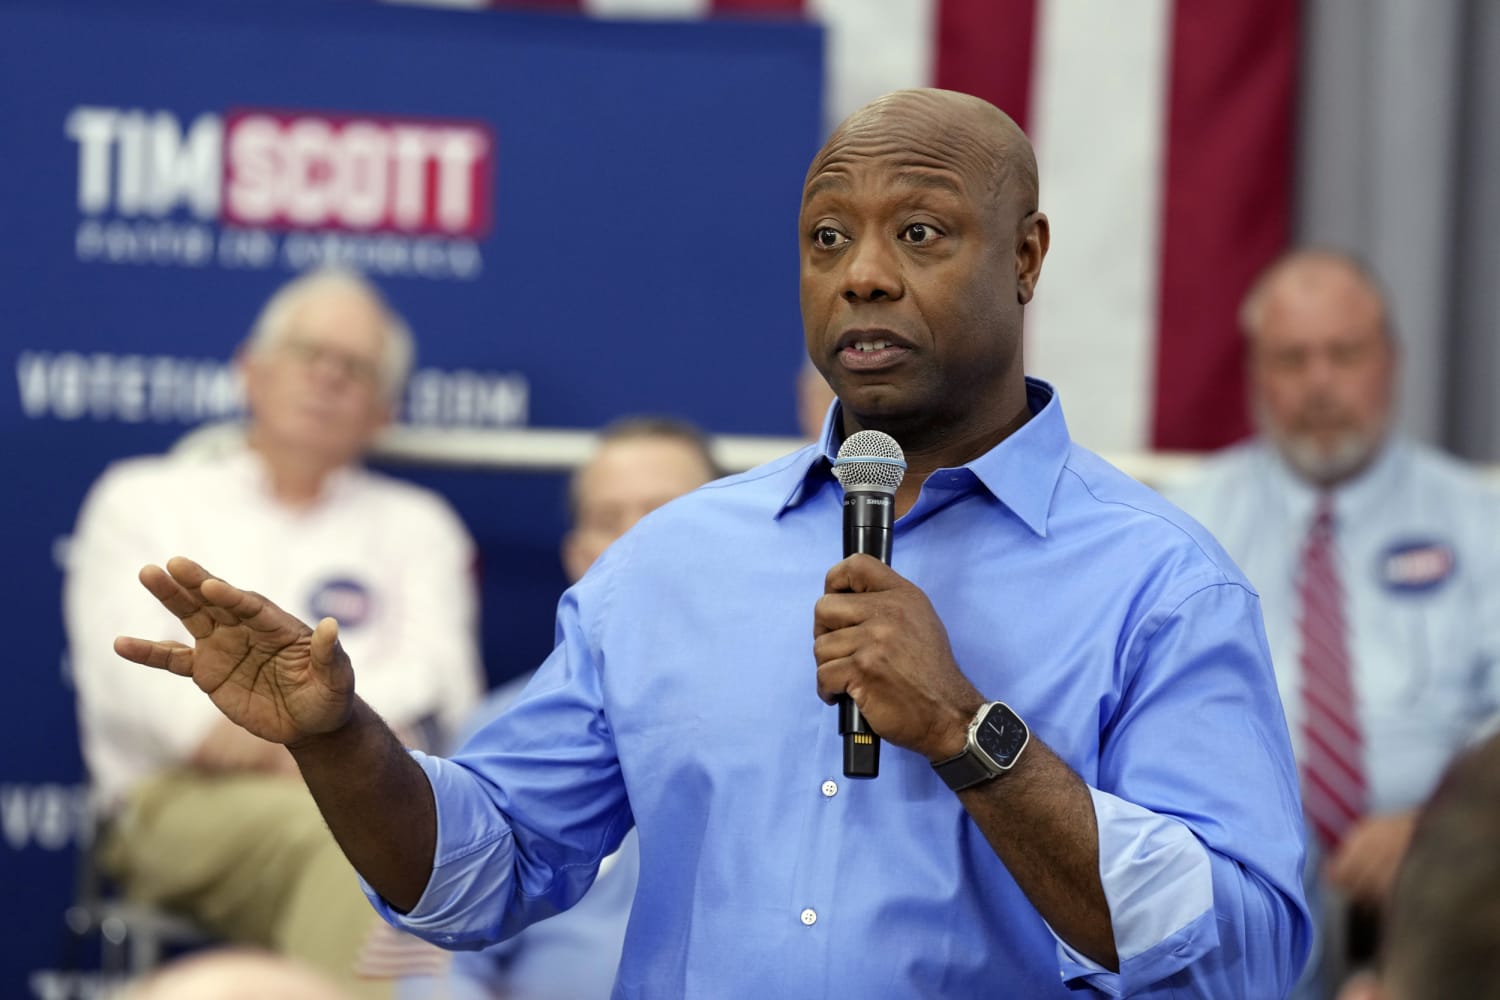 GOP Sen. Tim Scott signals he will officially announce his presidential campaign May 22